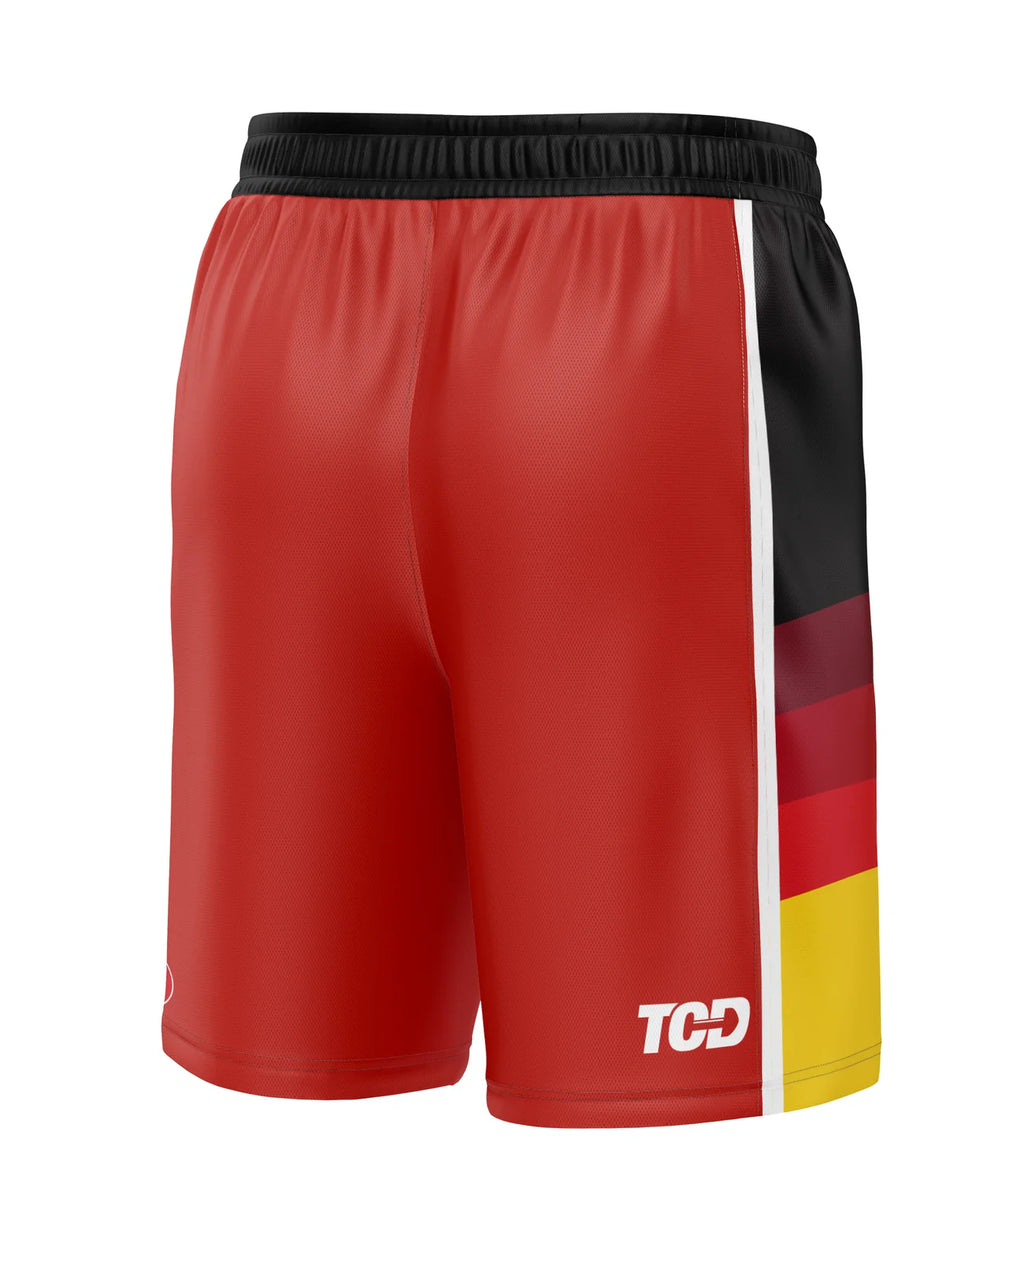 Champion Perth Wildcats 23/24 Home Shorts - Red